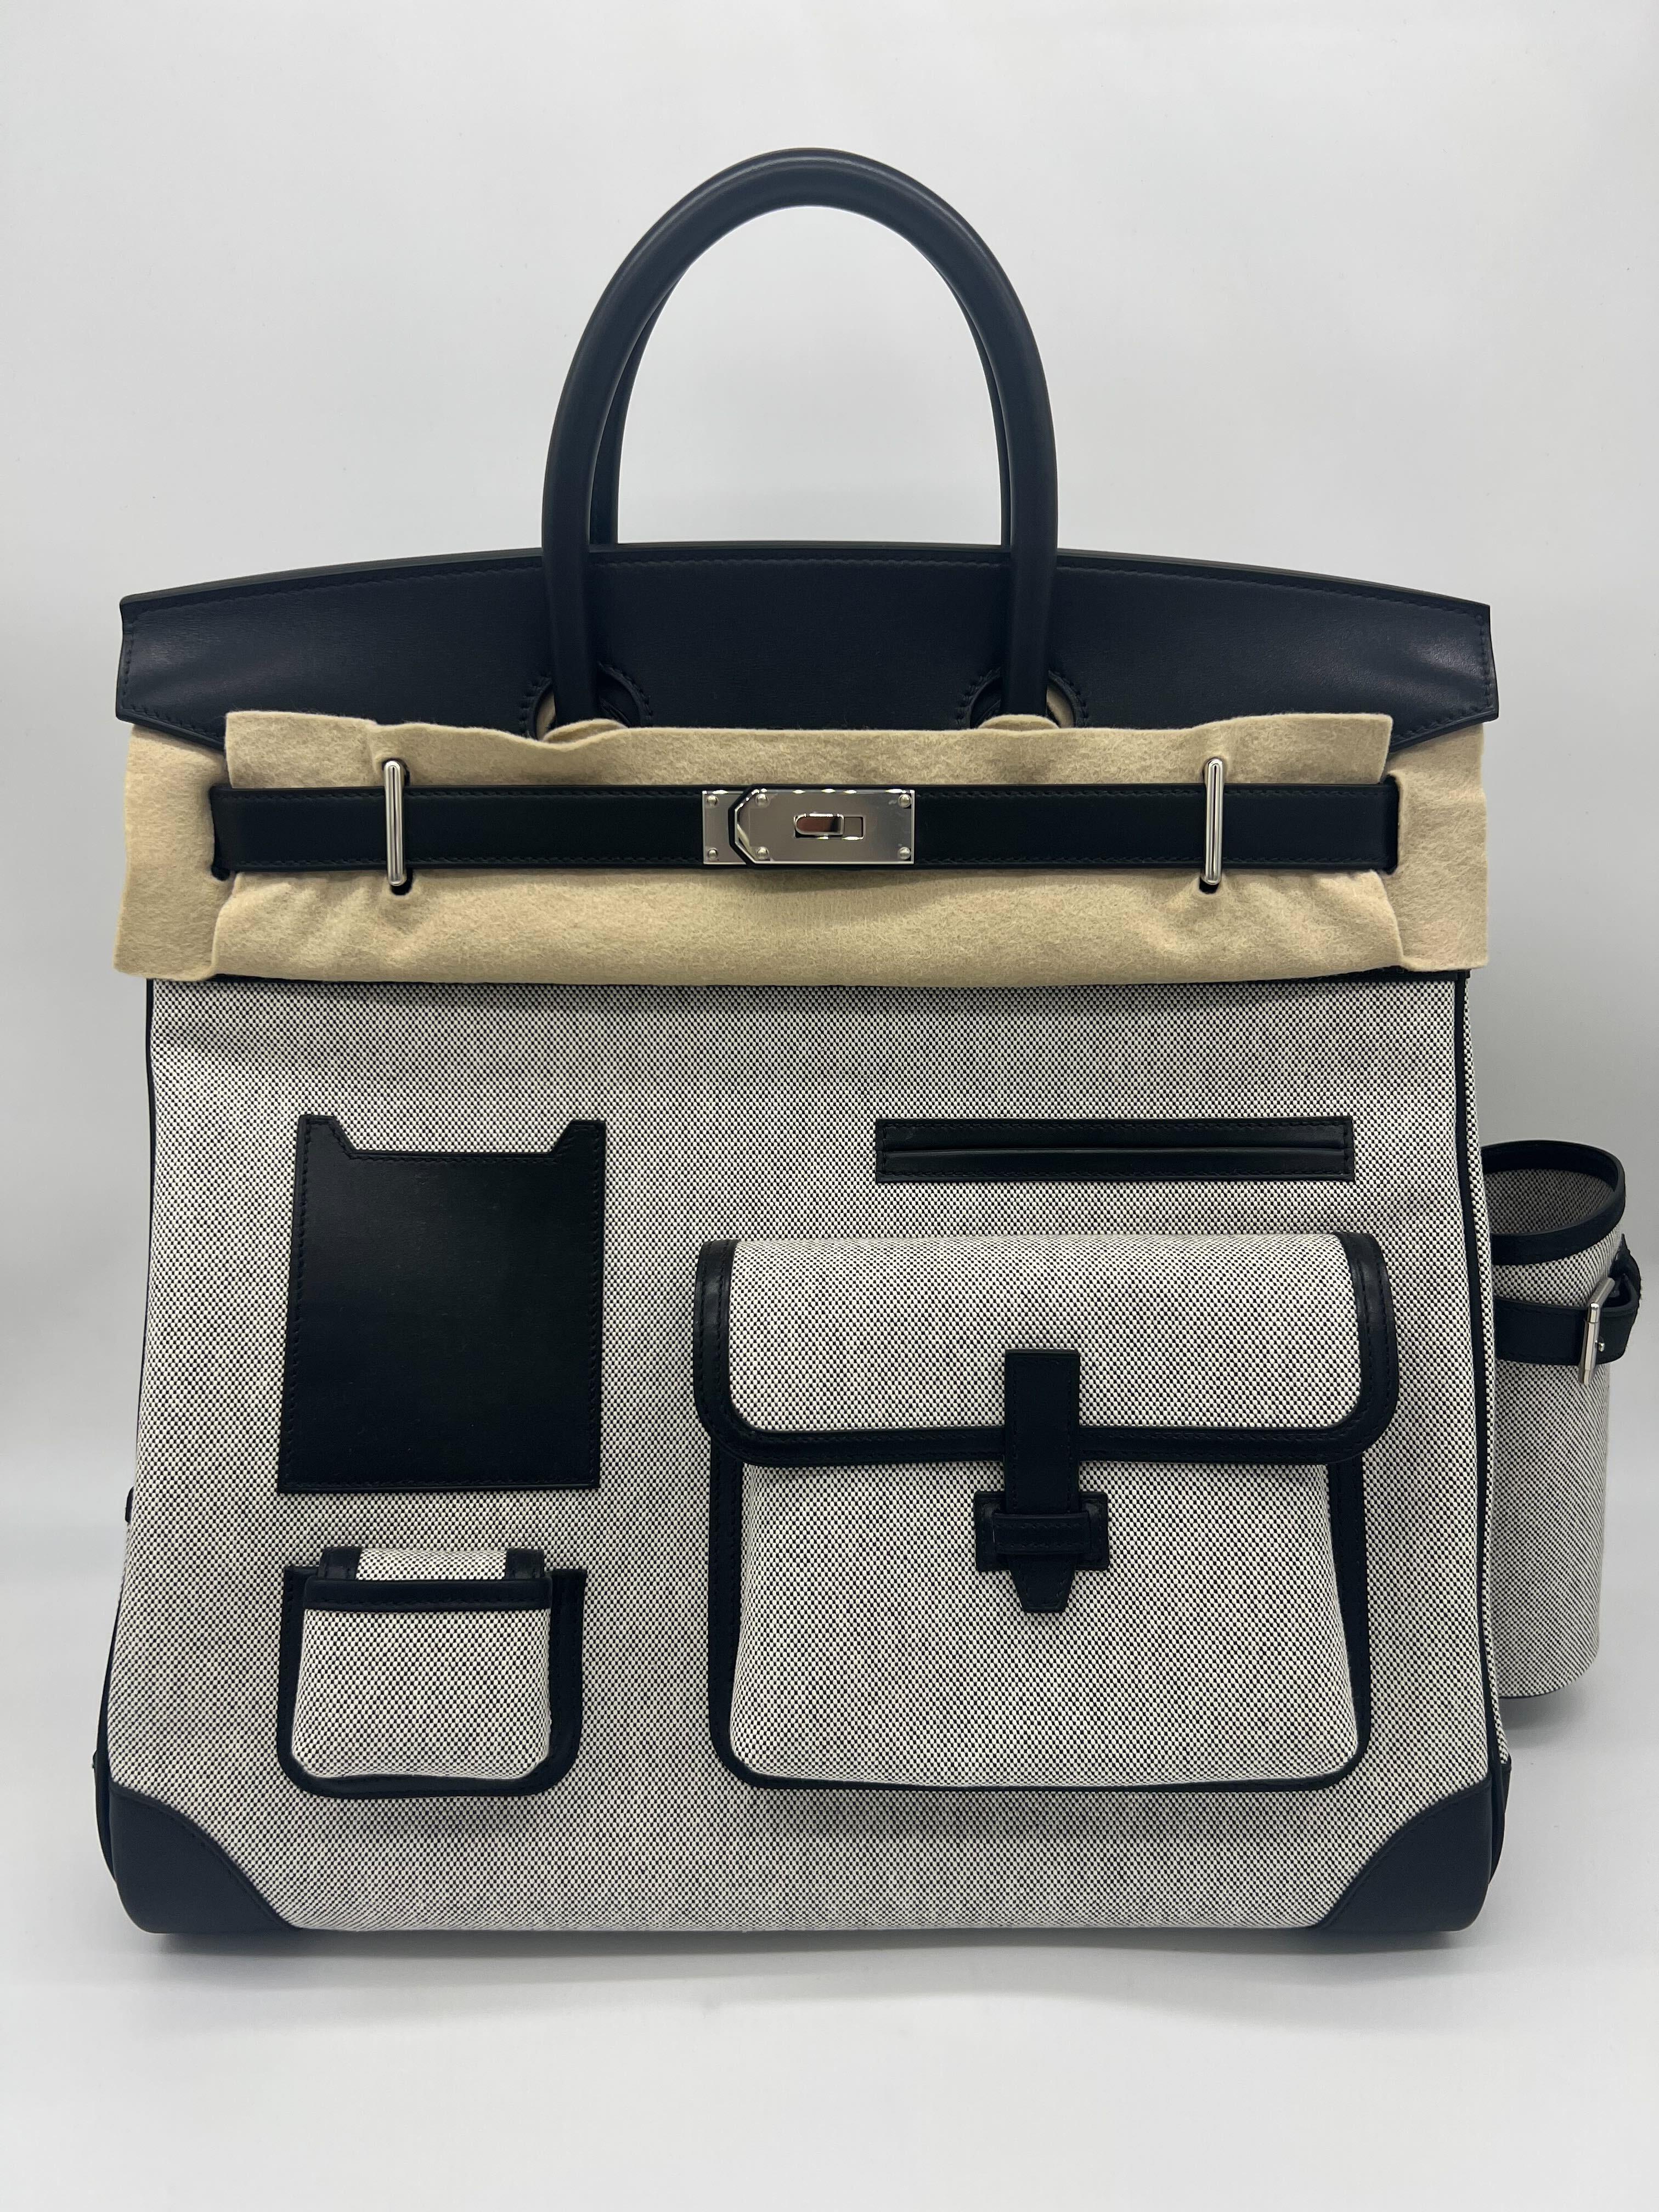 Hermes Birkin 40 Haut A Courroies 40 Cargo Bag AA Ecru-Noir/Noir
 
Condition: Brand New 
Material: Evercalf leather and Toile H
Measurements: 40 x 40 x 23cm
Hardware: Palladium
 
Comes with full original packaging. 
Includes original Hermes